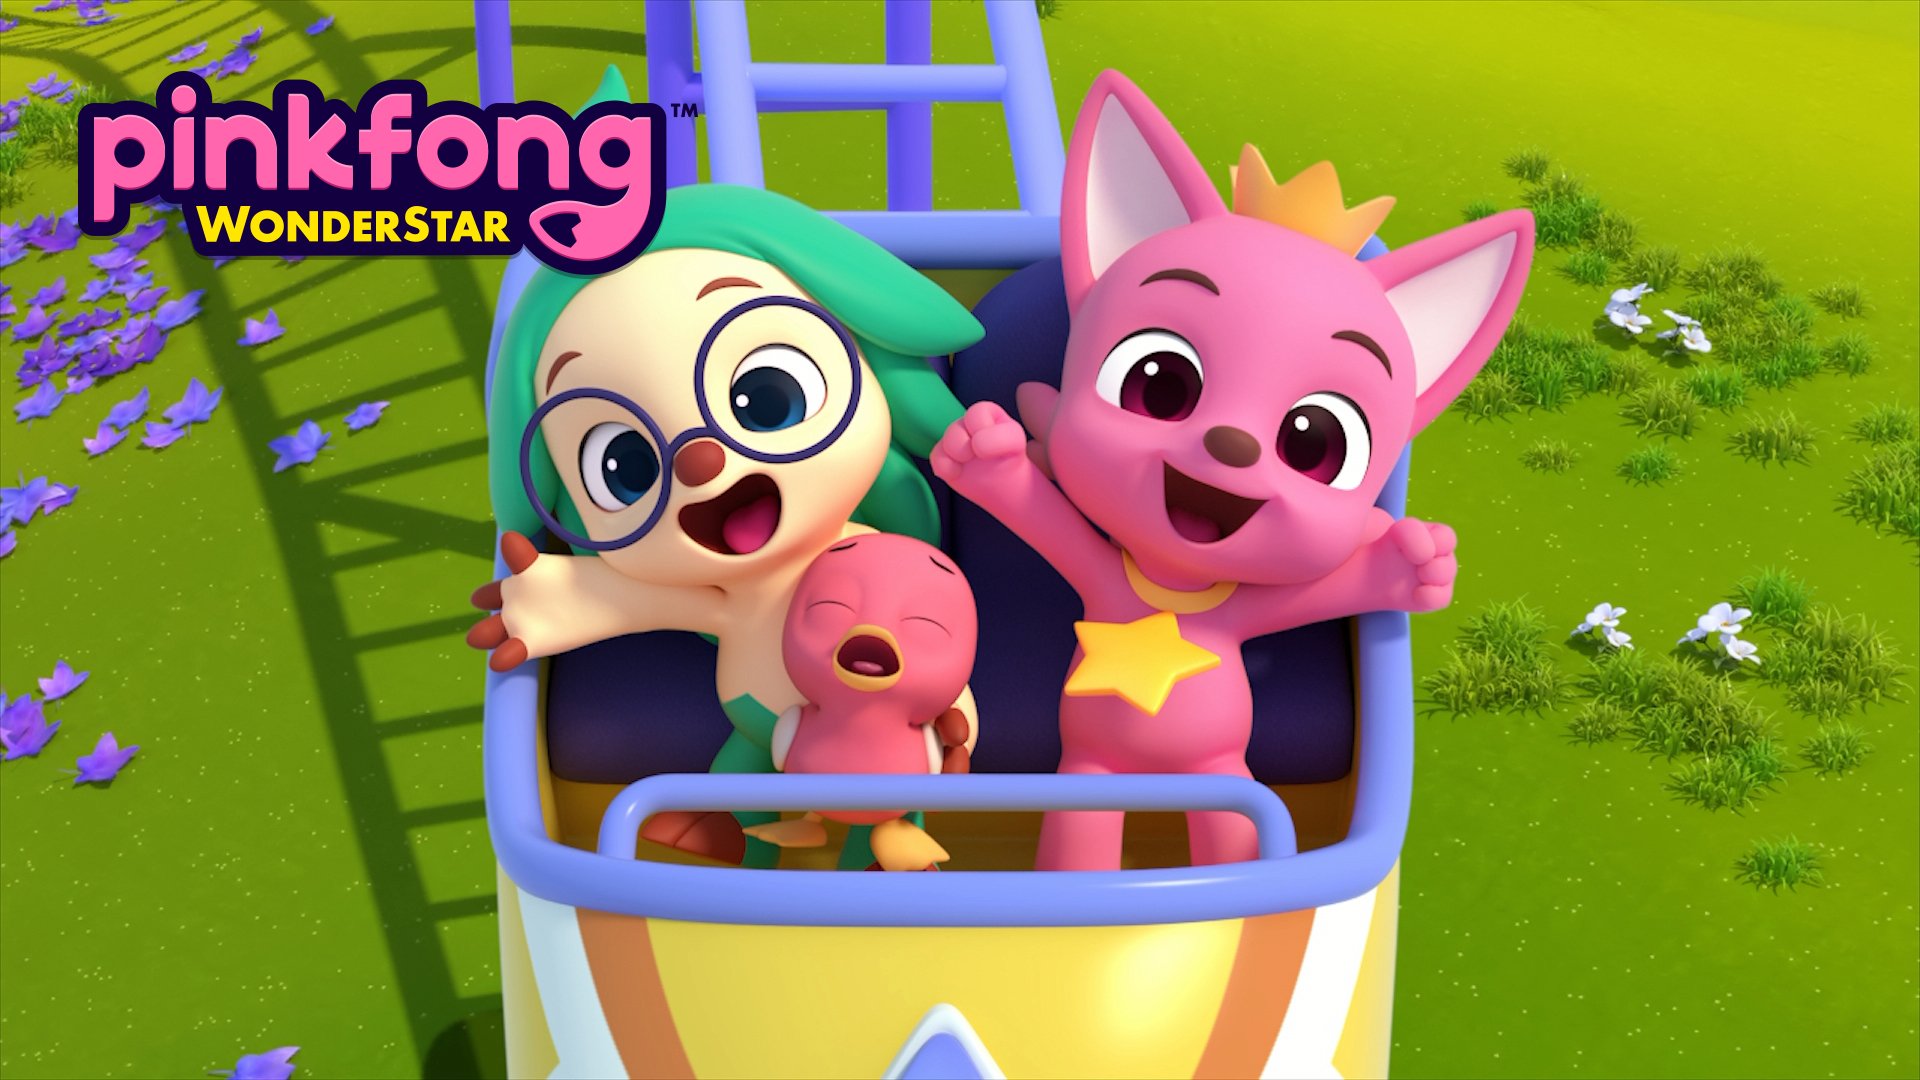 Pinkfong Wonderstar (Part 2) (Bilingual) S1 | What's On | Now TV